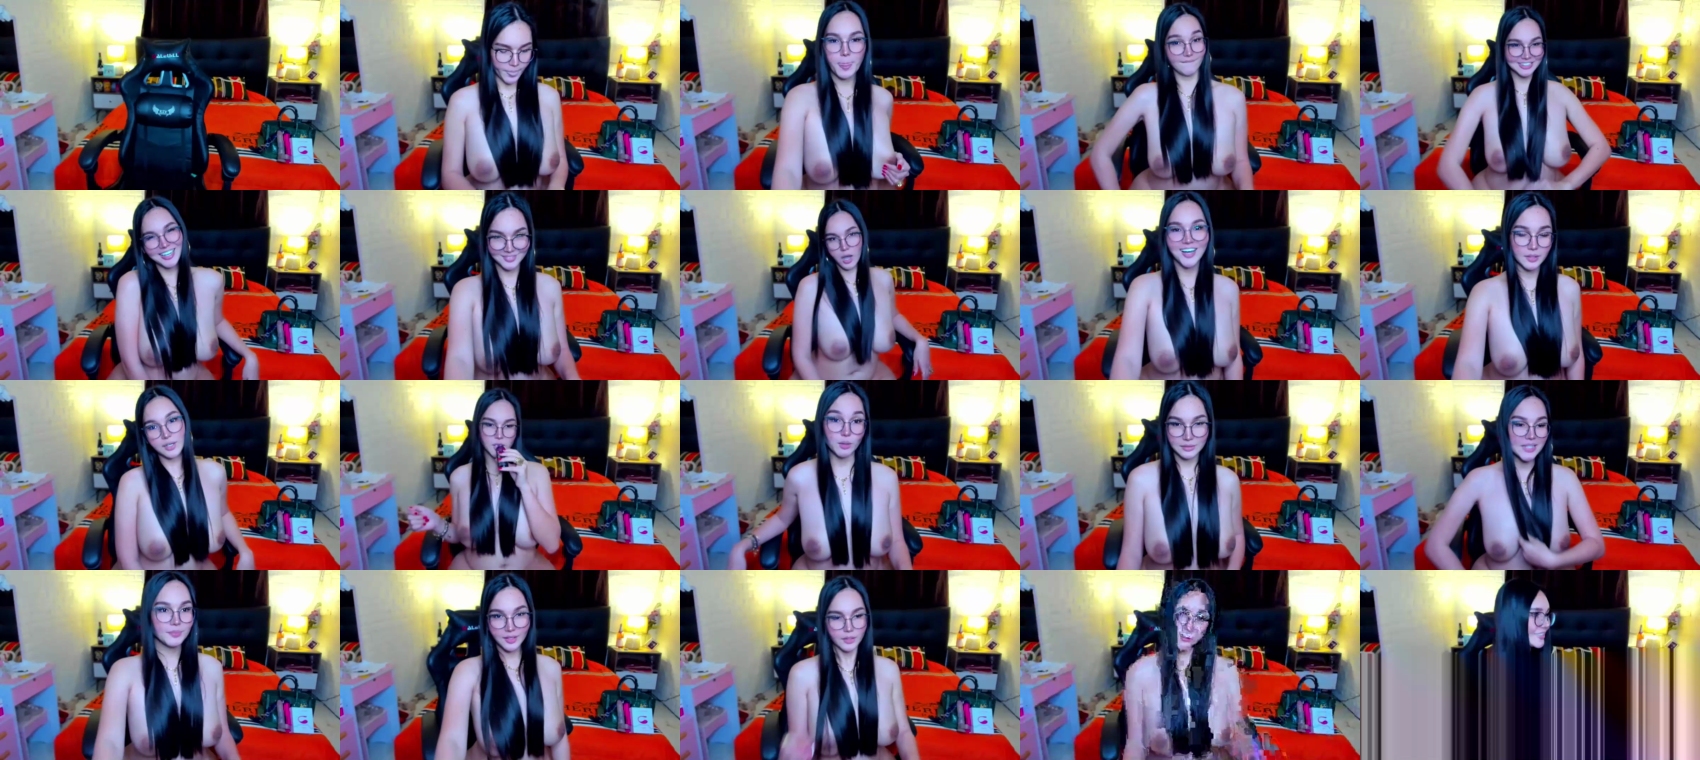 leahstarr Recorded CAM SHOW @ Chaturbate 15-12-2022